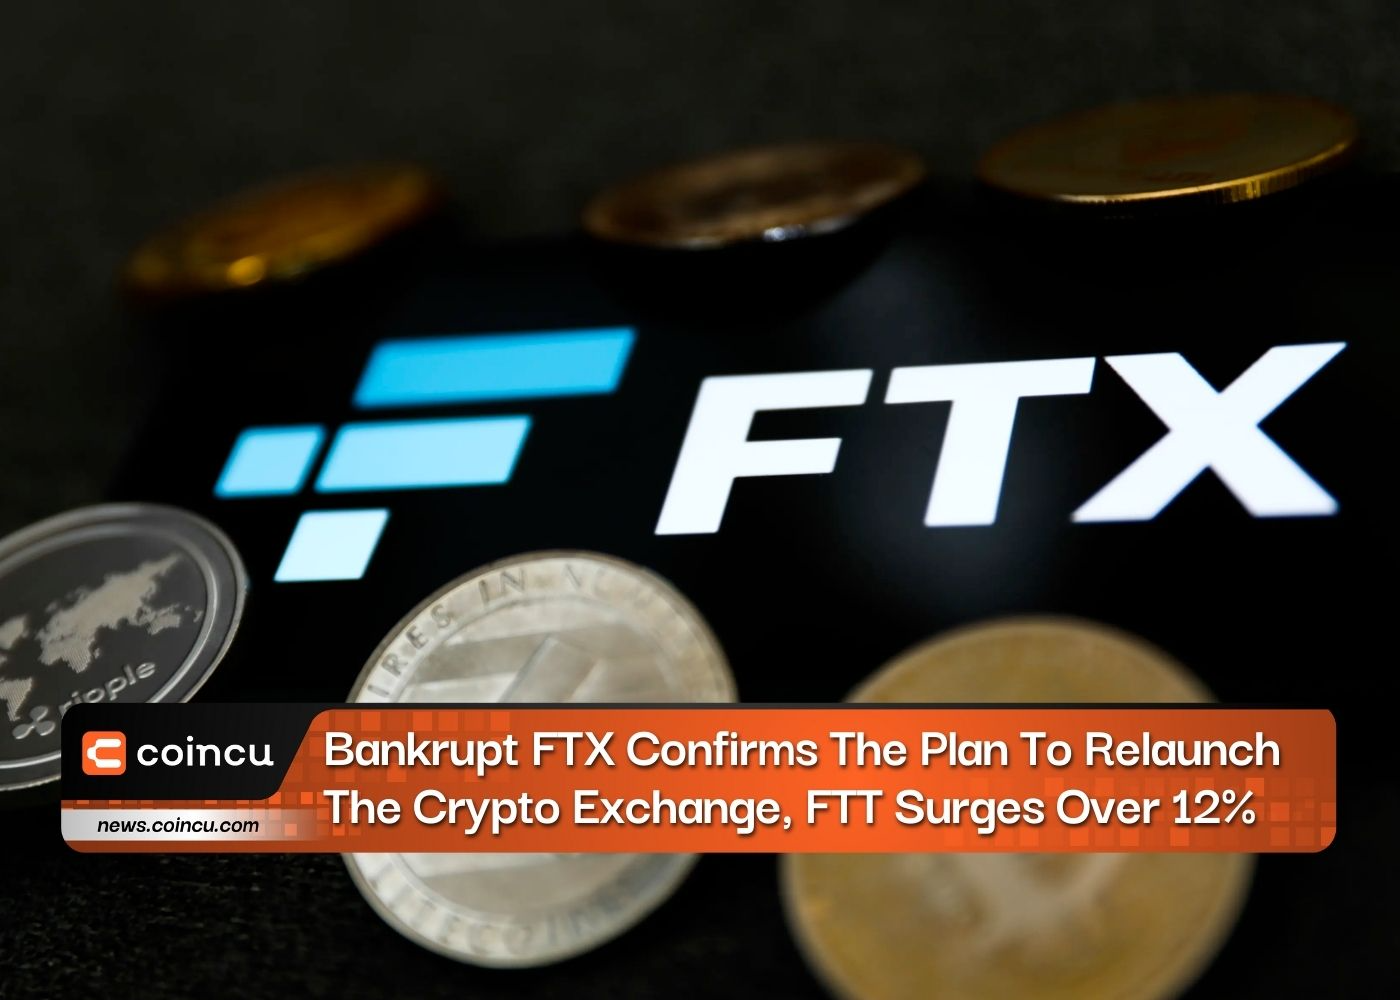 Bankrupt FTX Confirms The Plan To Relaunch The Crypto Exchange, FTT Surges Over 12%